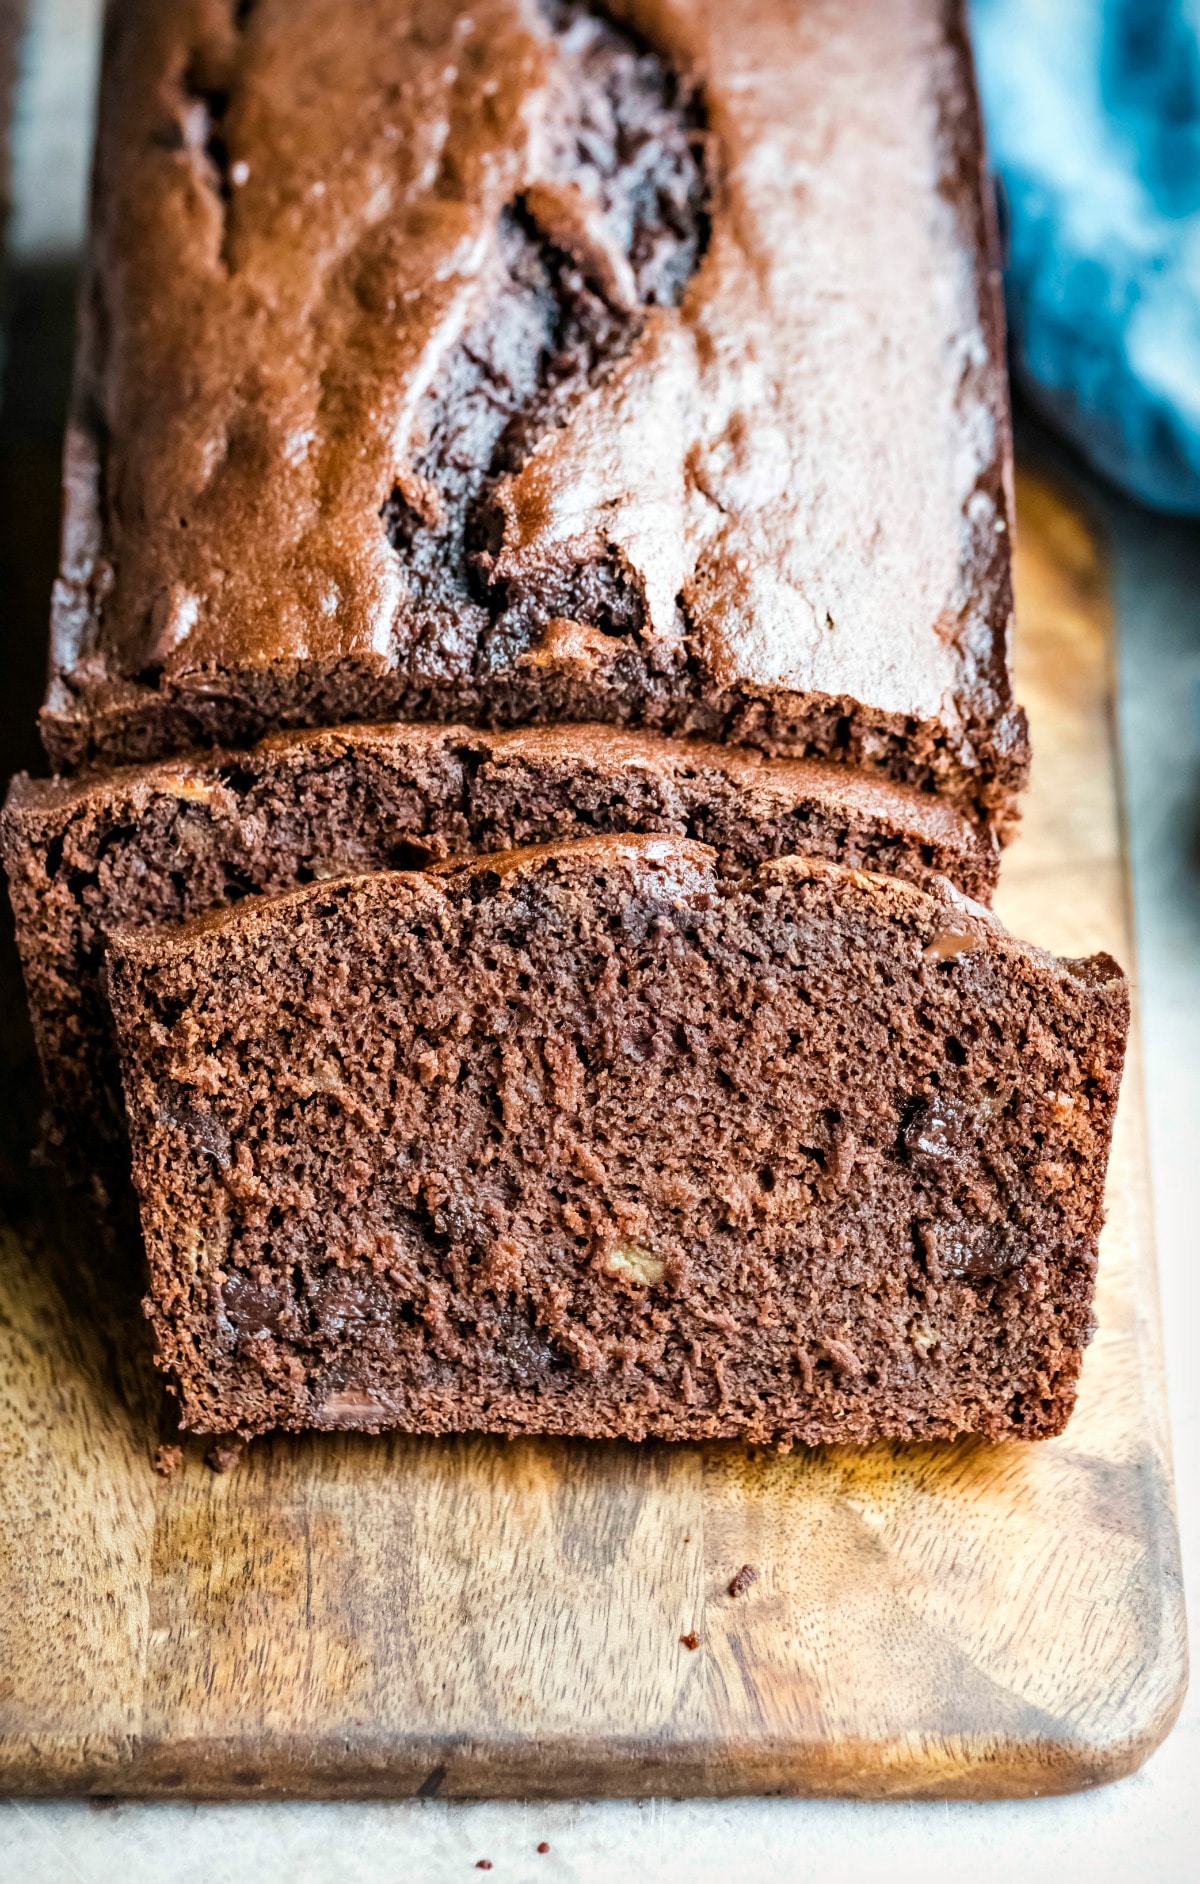 Loaf of chocolate banana bread with two slices cut from it